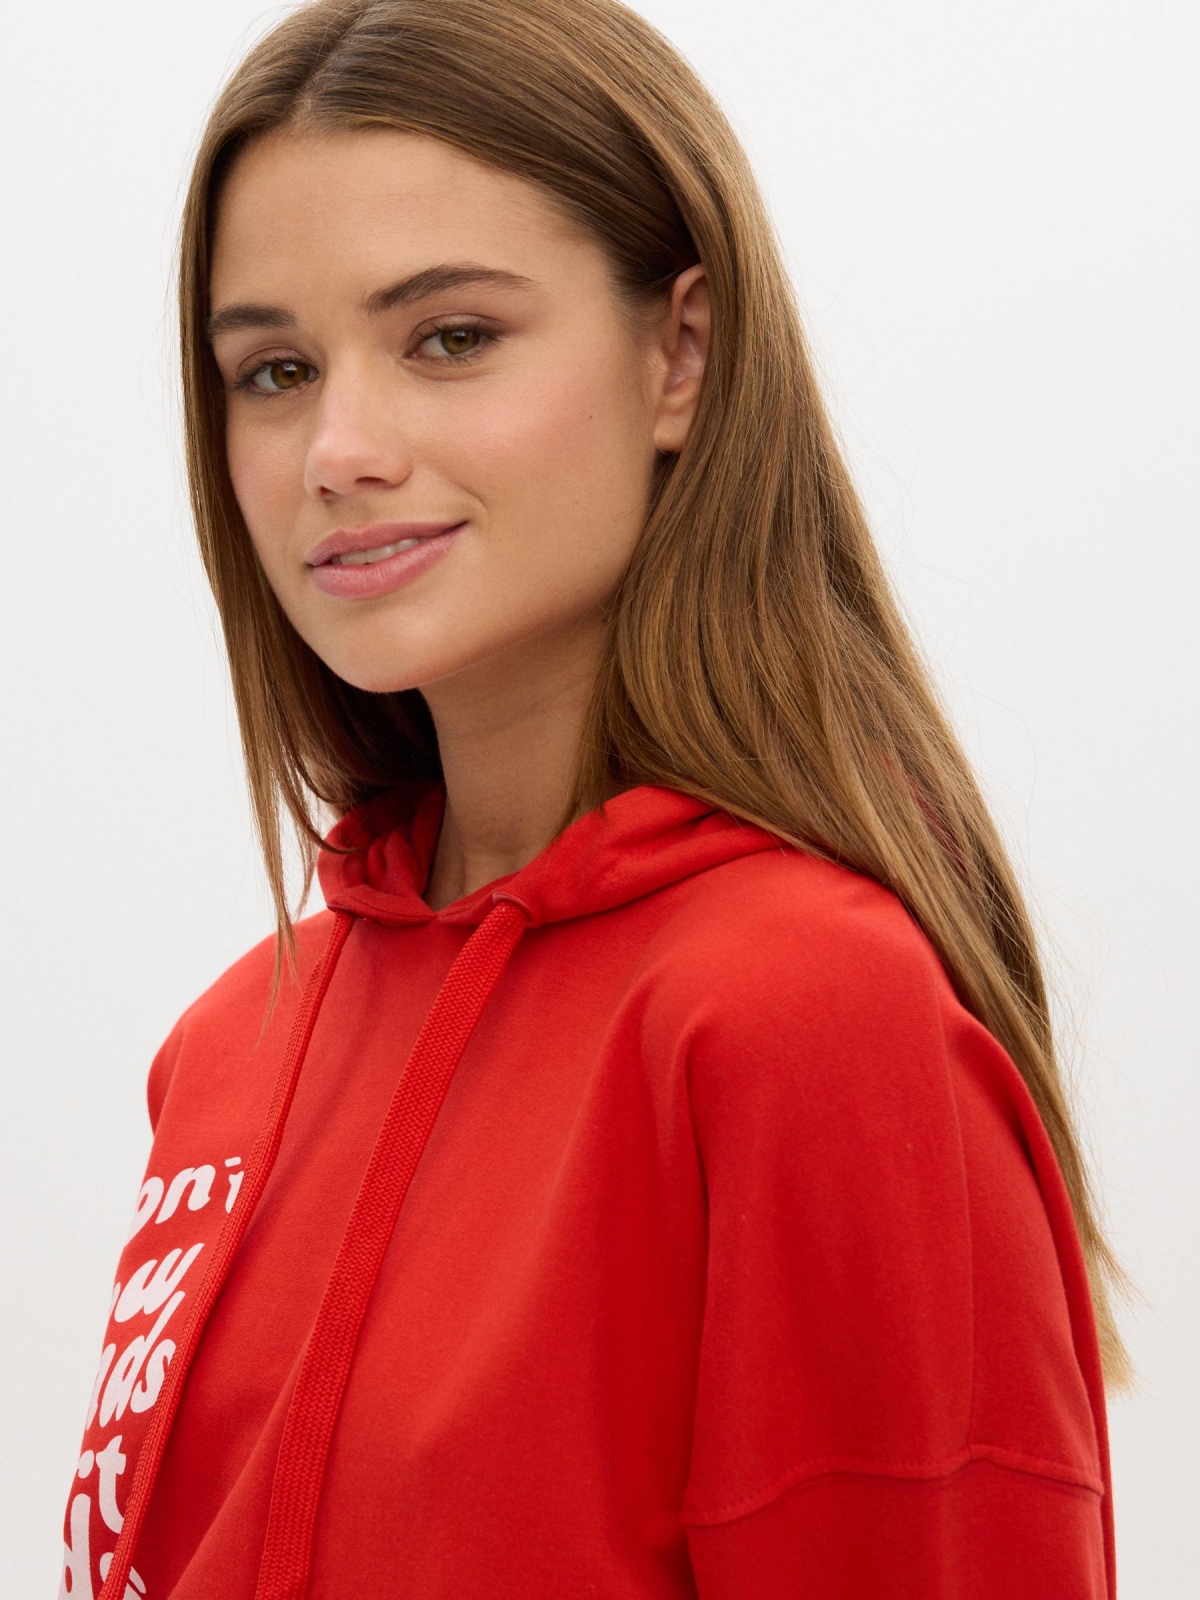 Don't Follow Trends Sweatshirt red detail view